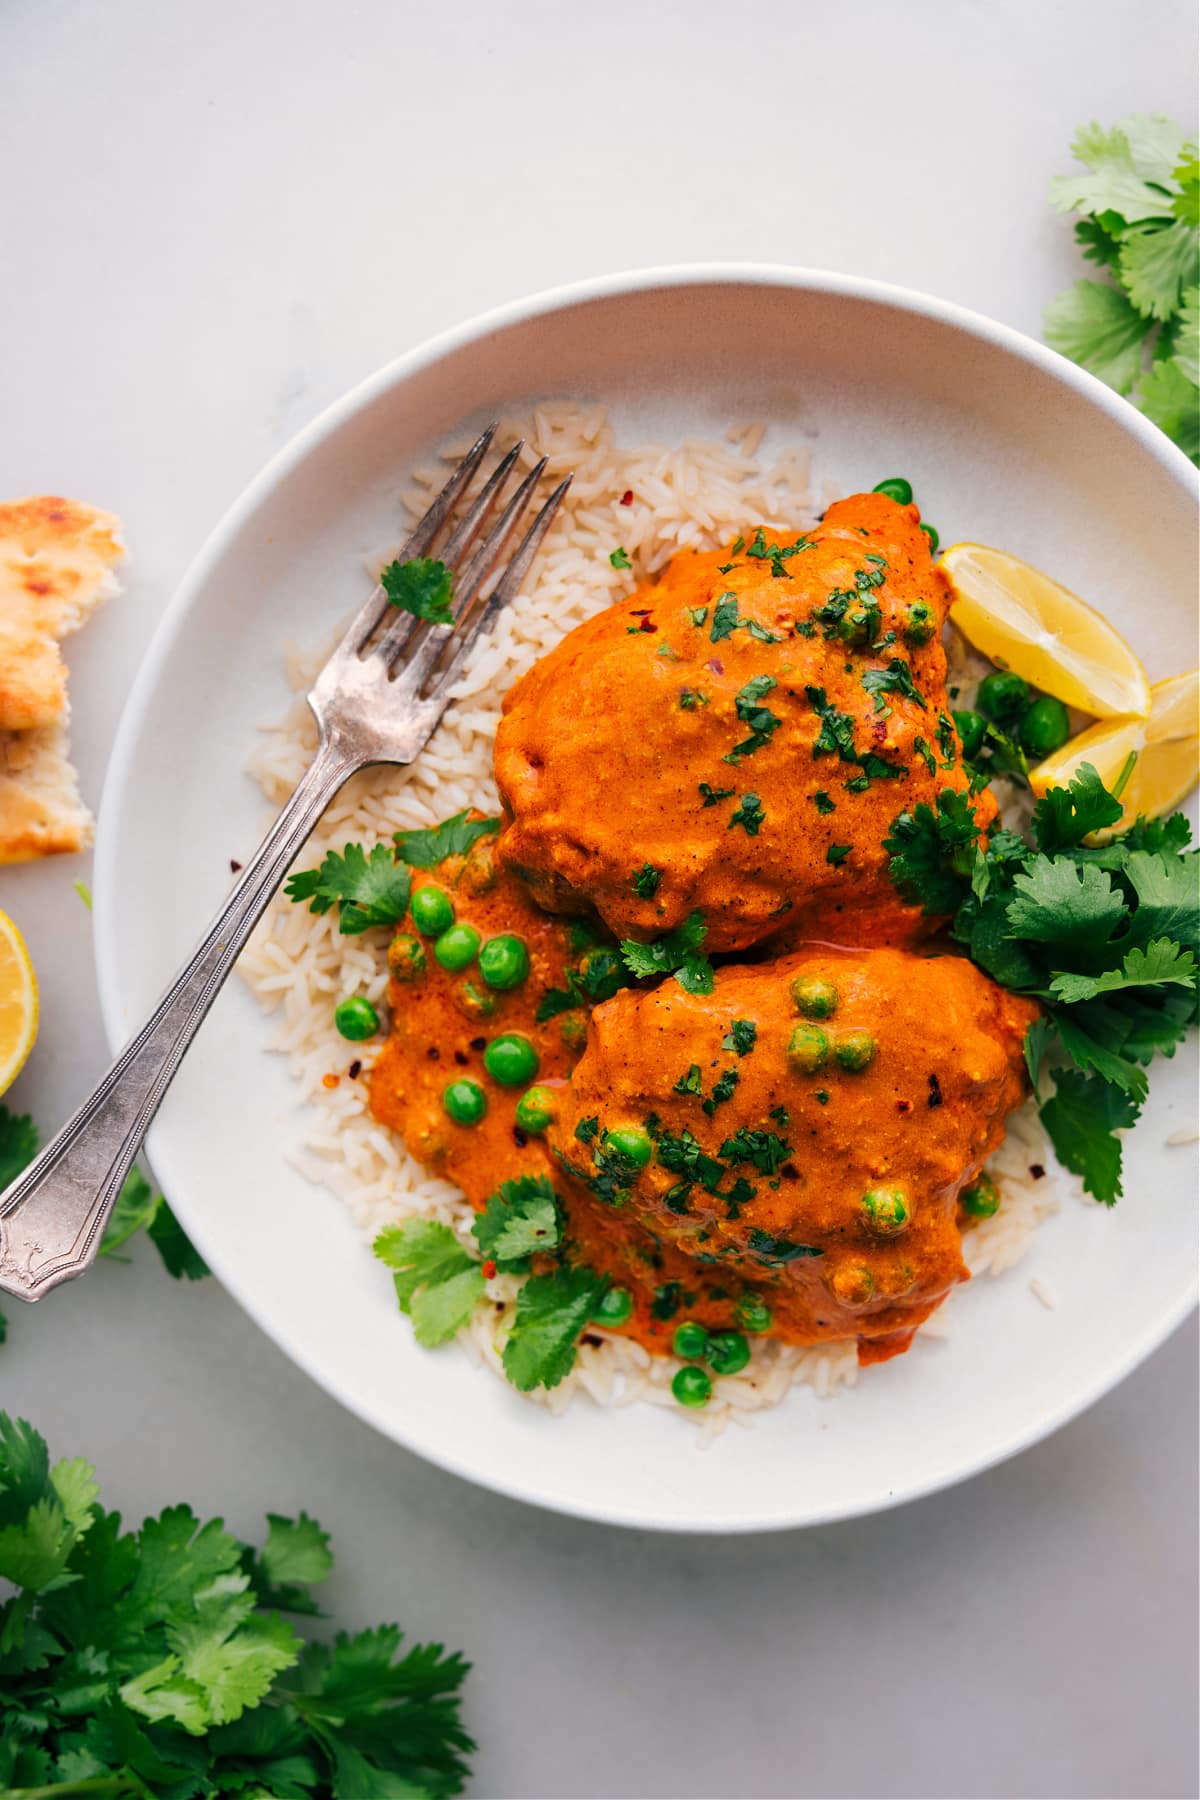 A finished Chicken Tikka Masala dish laid over a bed of rice, delicious, warm, and aromatic.